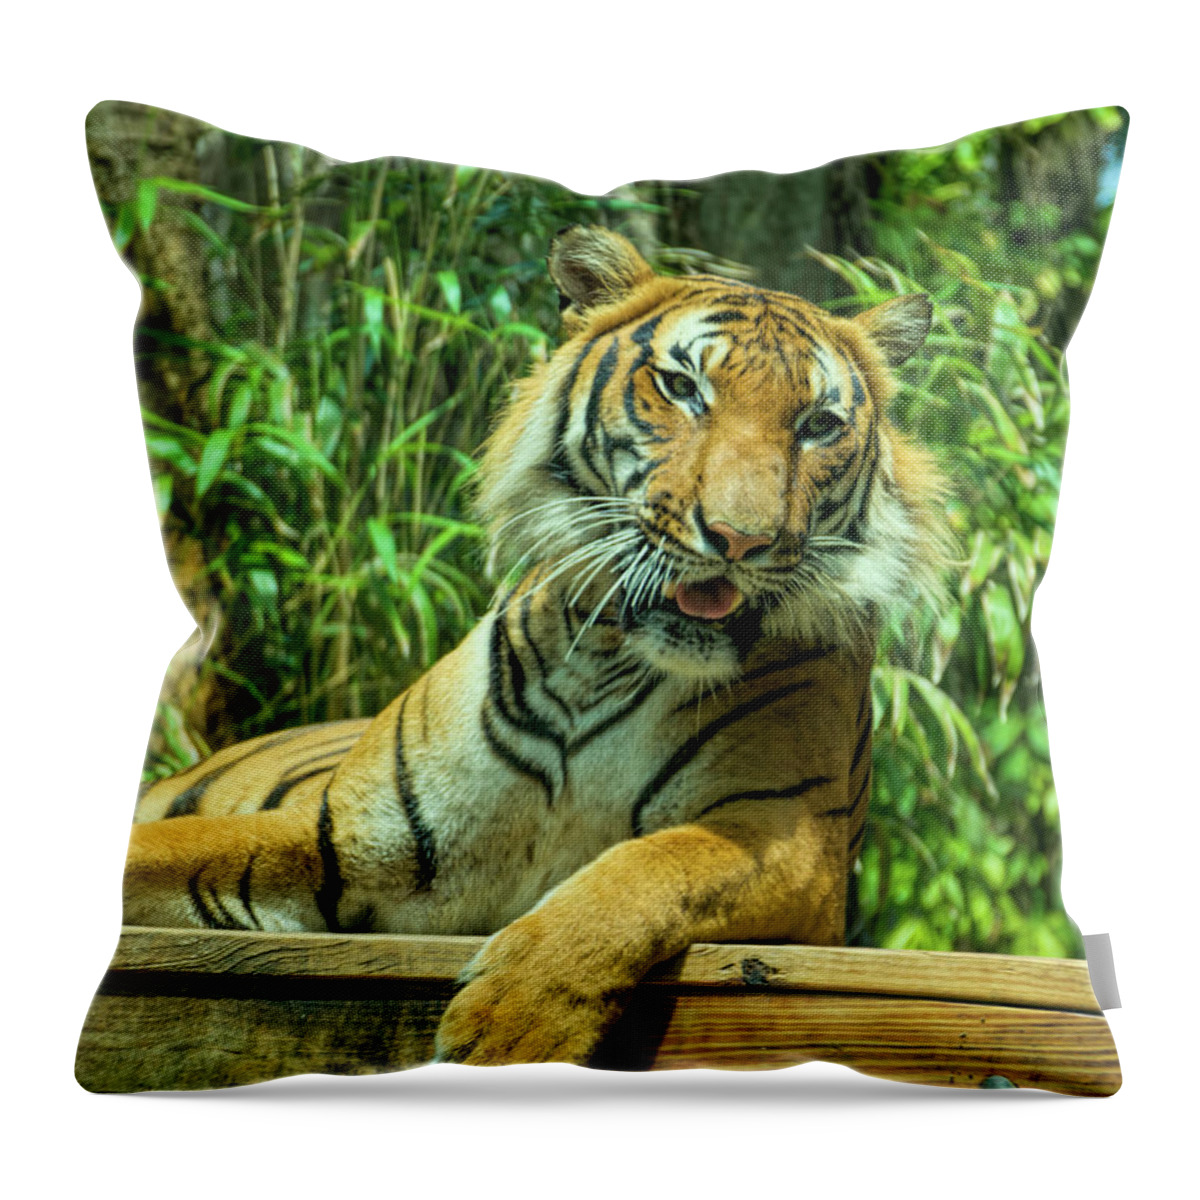 Tiger Throw Pillow featuring the photograph Reclining Tiger by Artful Imagery